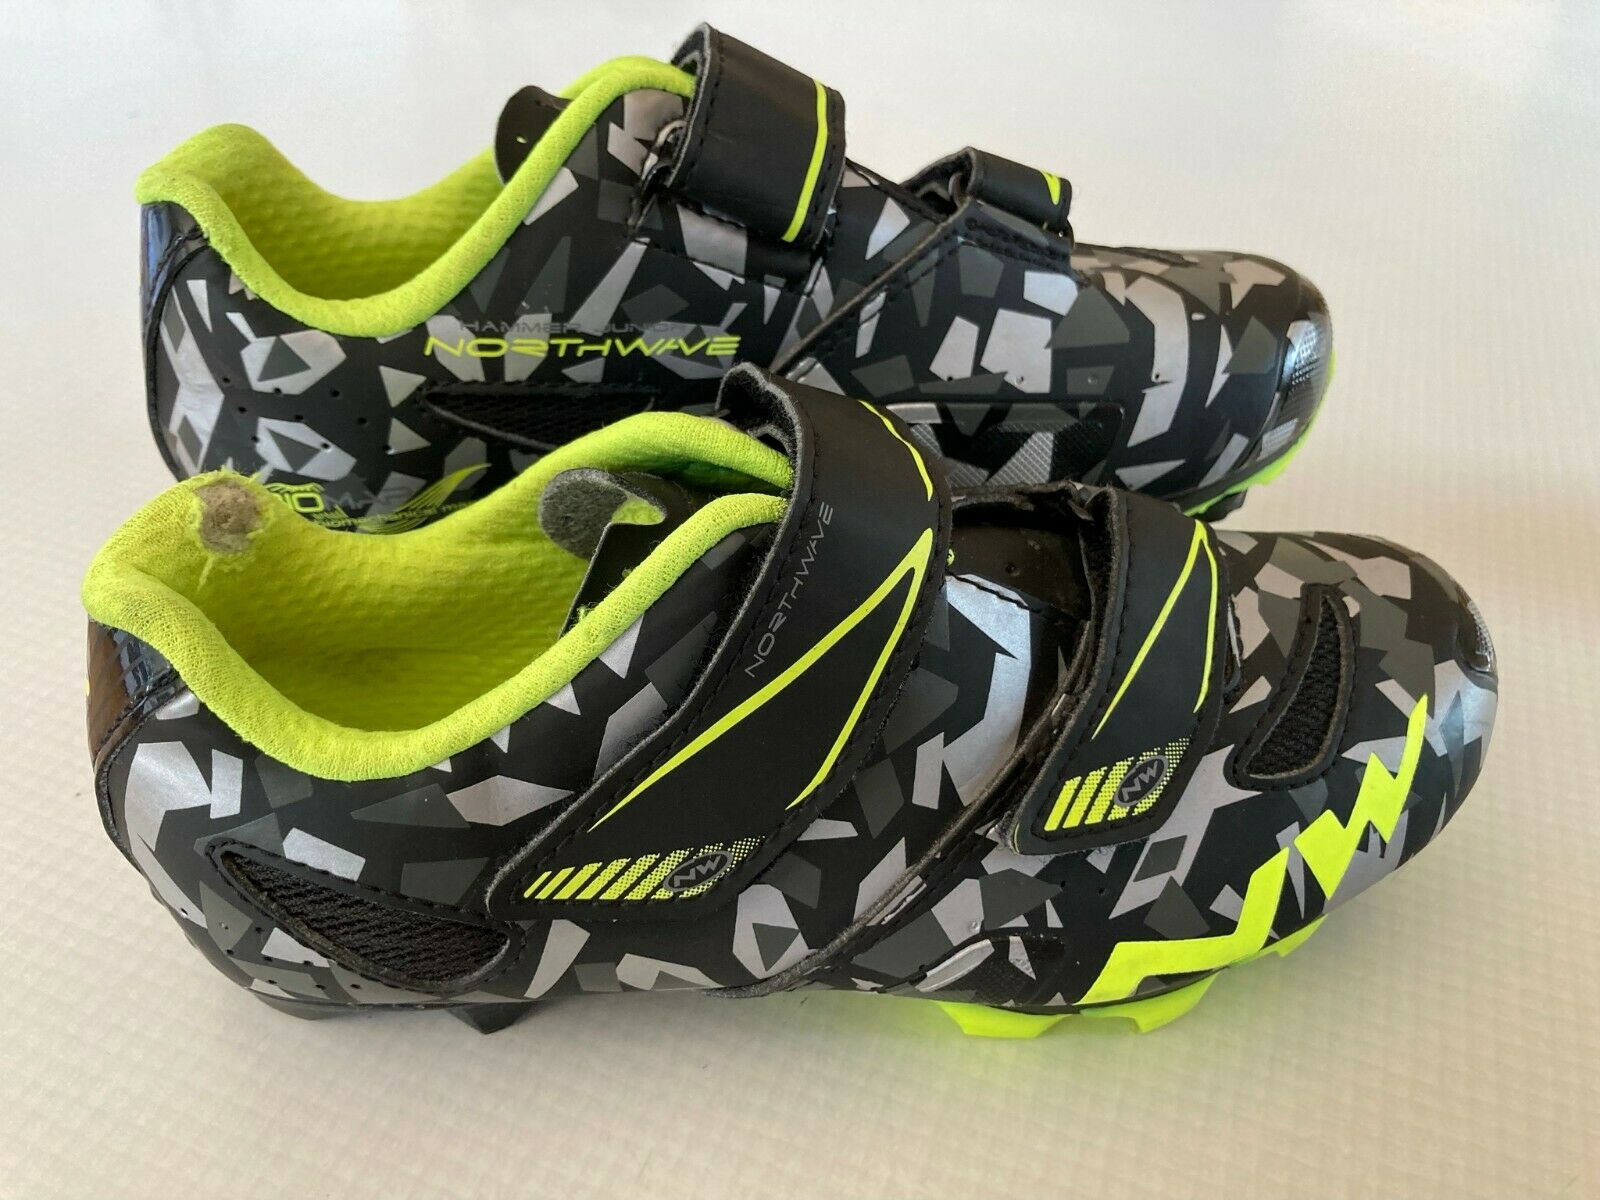 Northwave Hammer Junior Bio Map Gray Black Neon Green Cycling Shoes Size 2